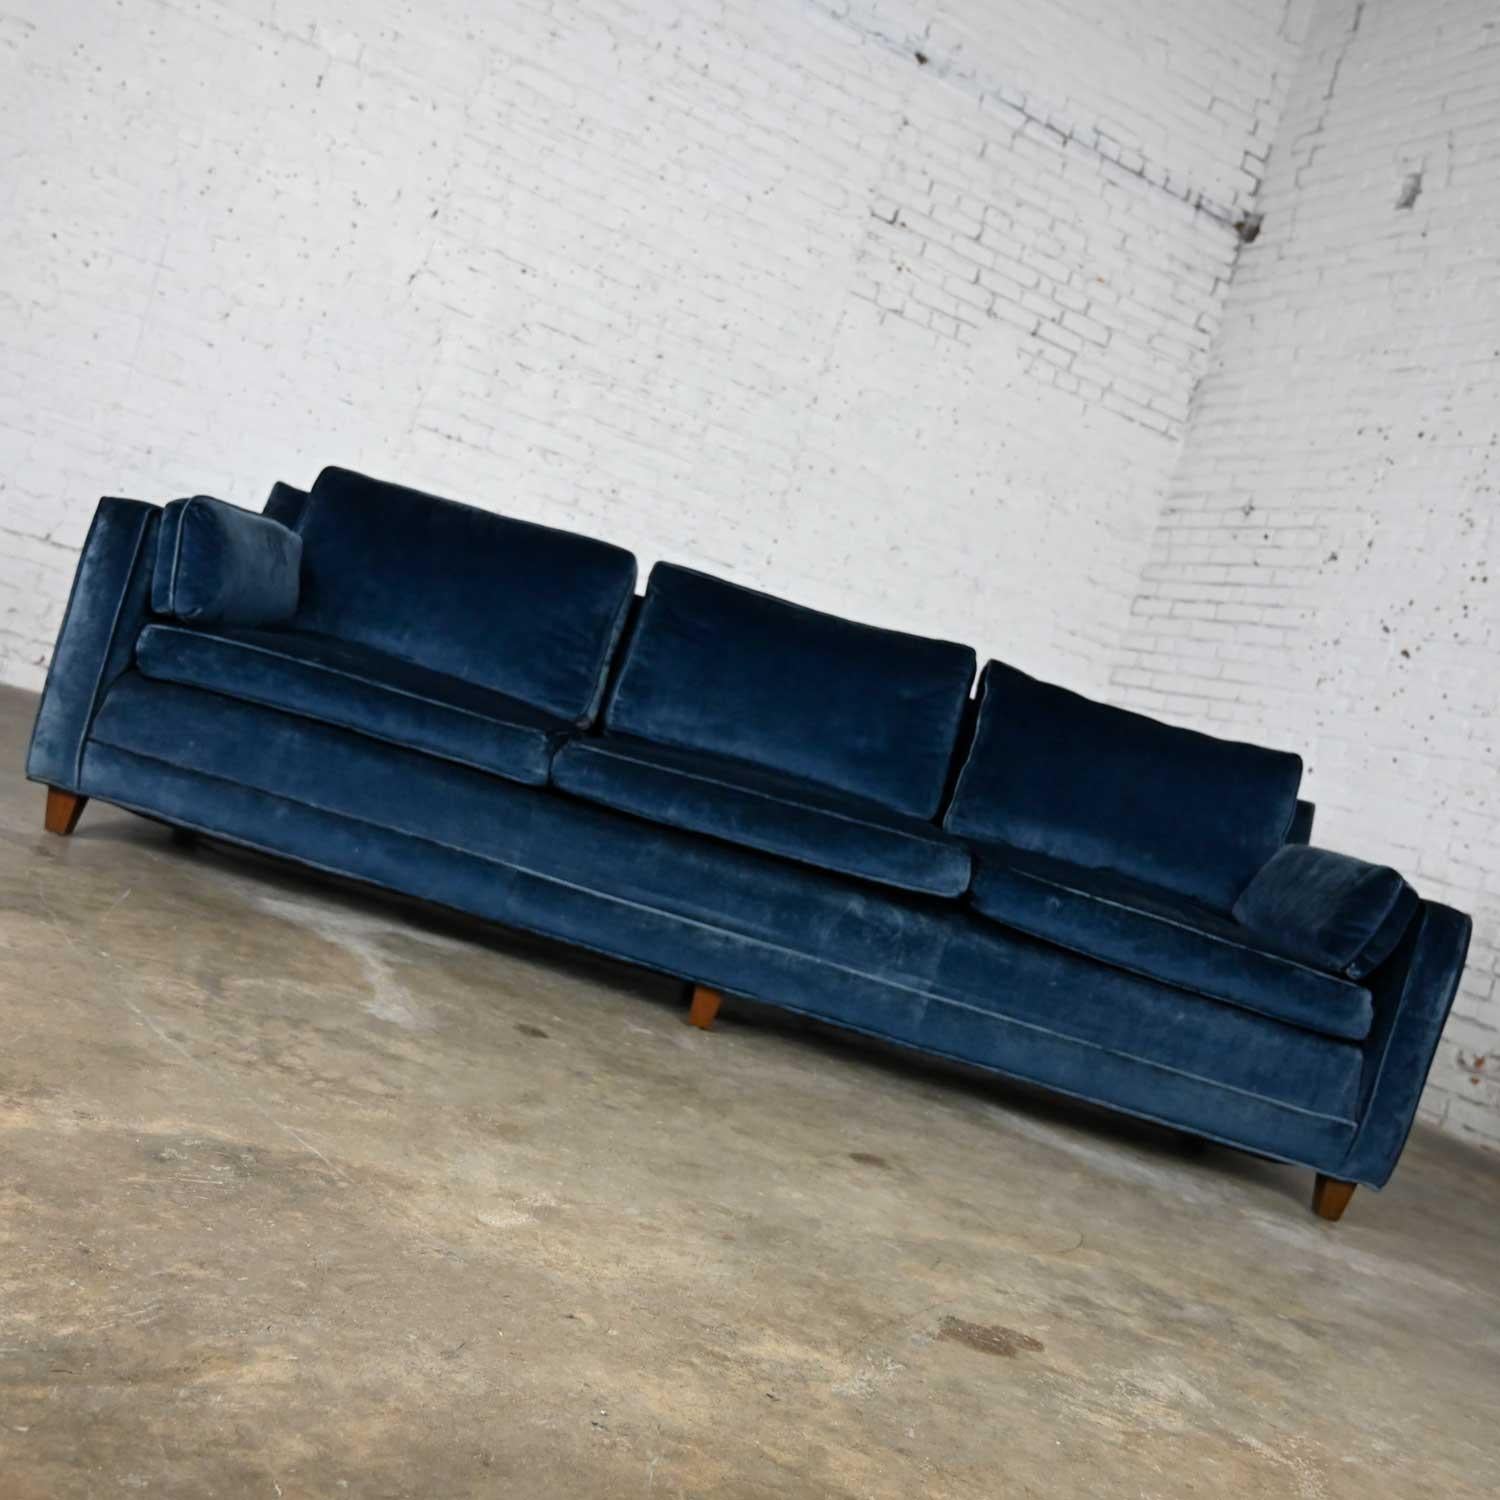 Wonderful vintage Baker Lawson style low profile sofa in Bellagio cobalt fabric by Fabricut. There are a few water spots along the front lower center and edge of the sofa and one of the cushions and a spot on one of the cushions that looks like a